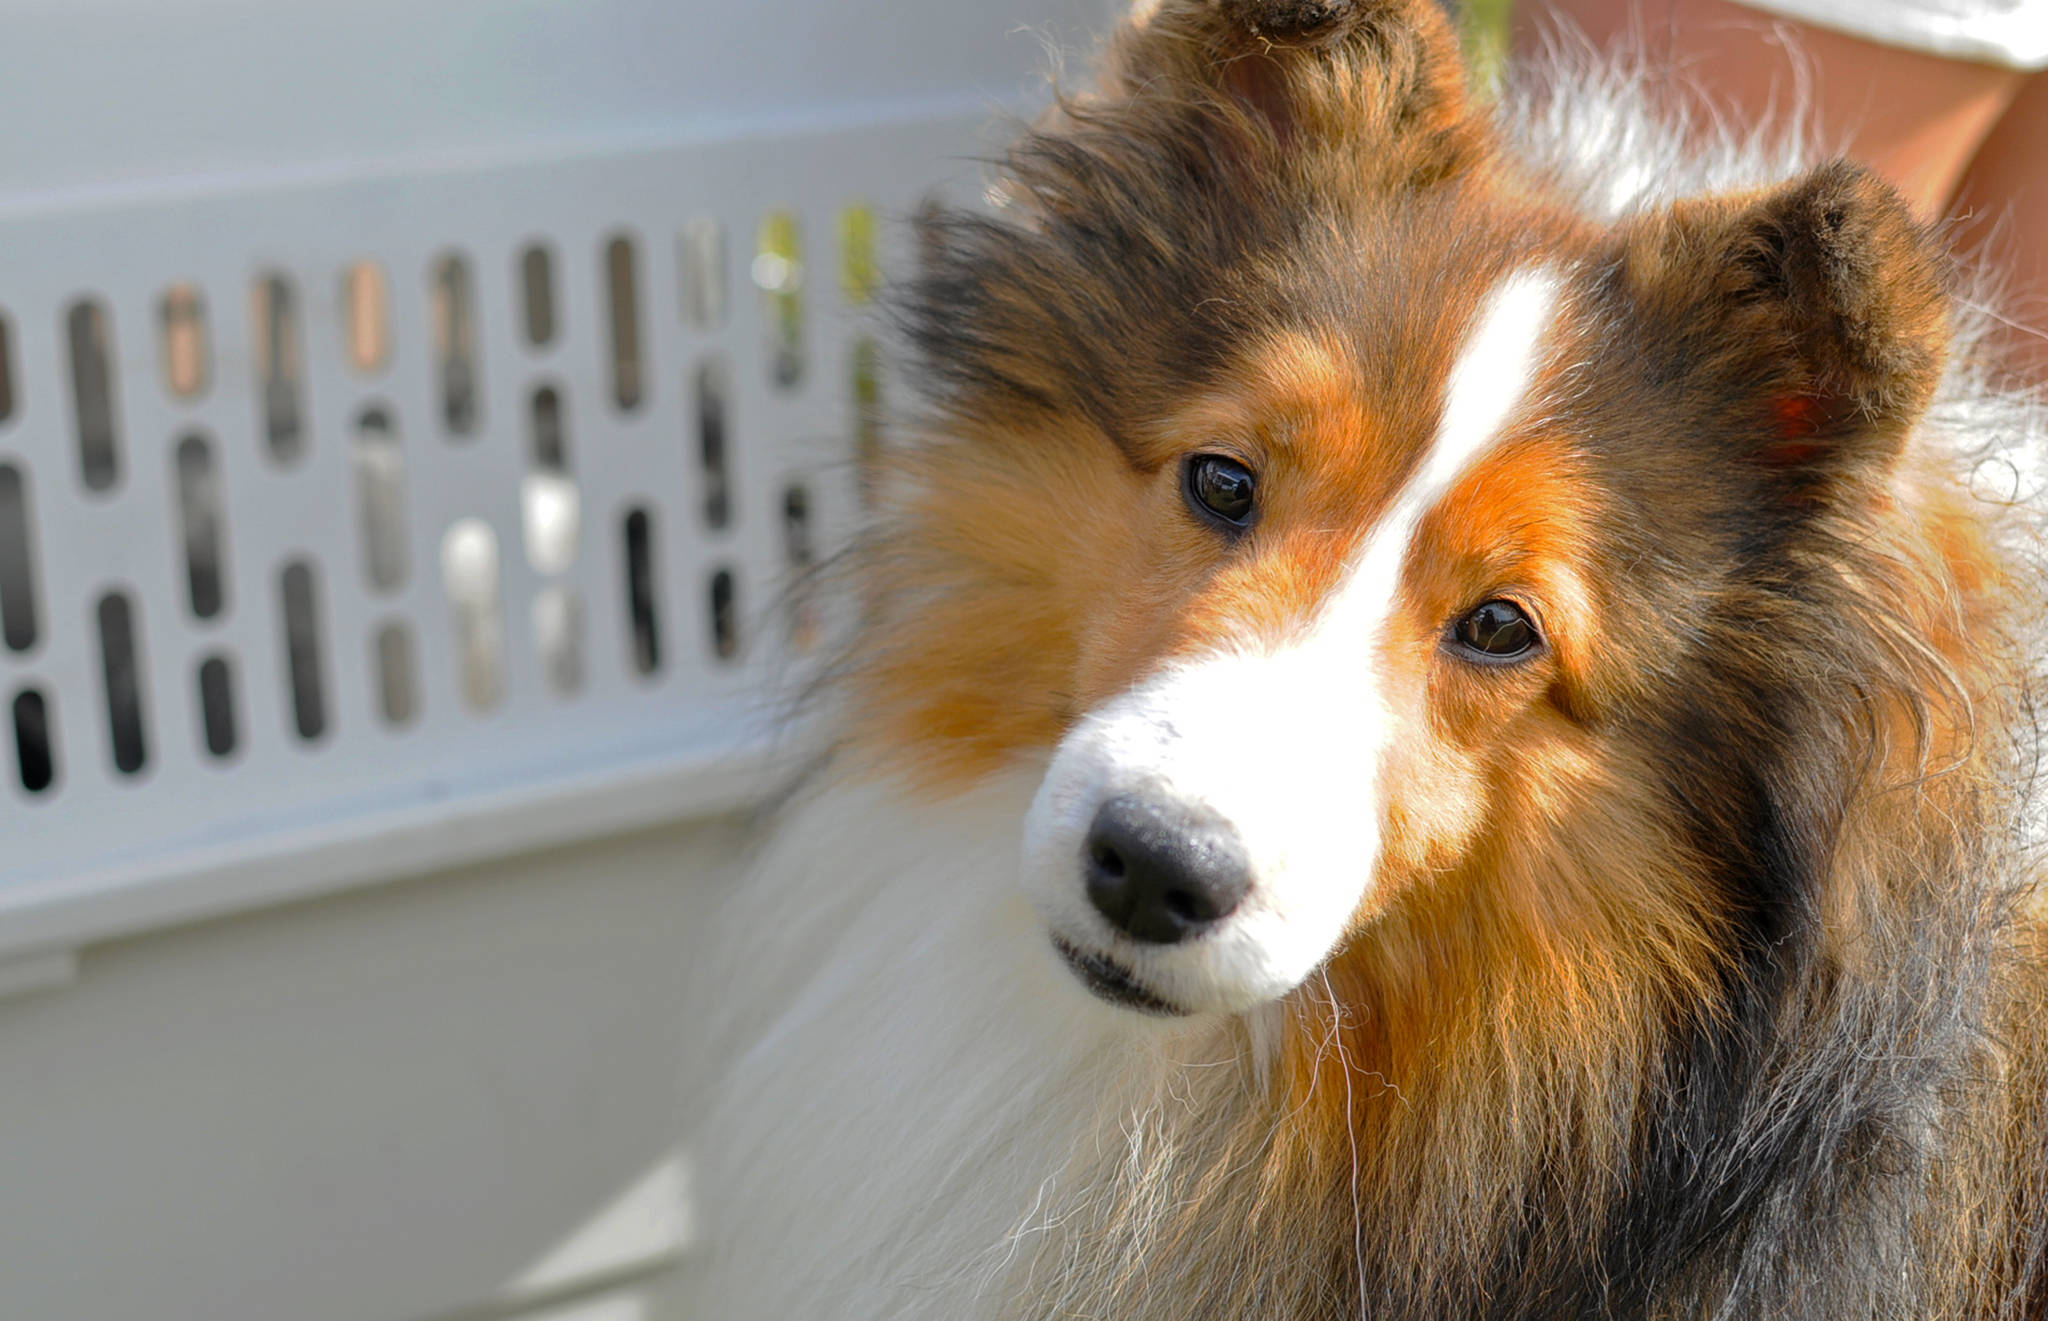 A sheltie hangs out with trainers before competing in the Kenai Kennel Club’s annual dog show, obedience and agility trials on Saturday, July 14, 2018 in Soldotna, Alaska. Dog owners come from all over the state to take part in the events each year. (Photo by Elizabeth Earl/Peninsula Clarion)